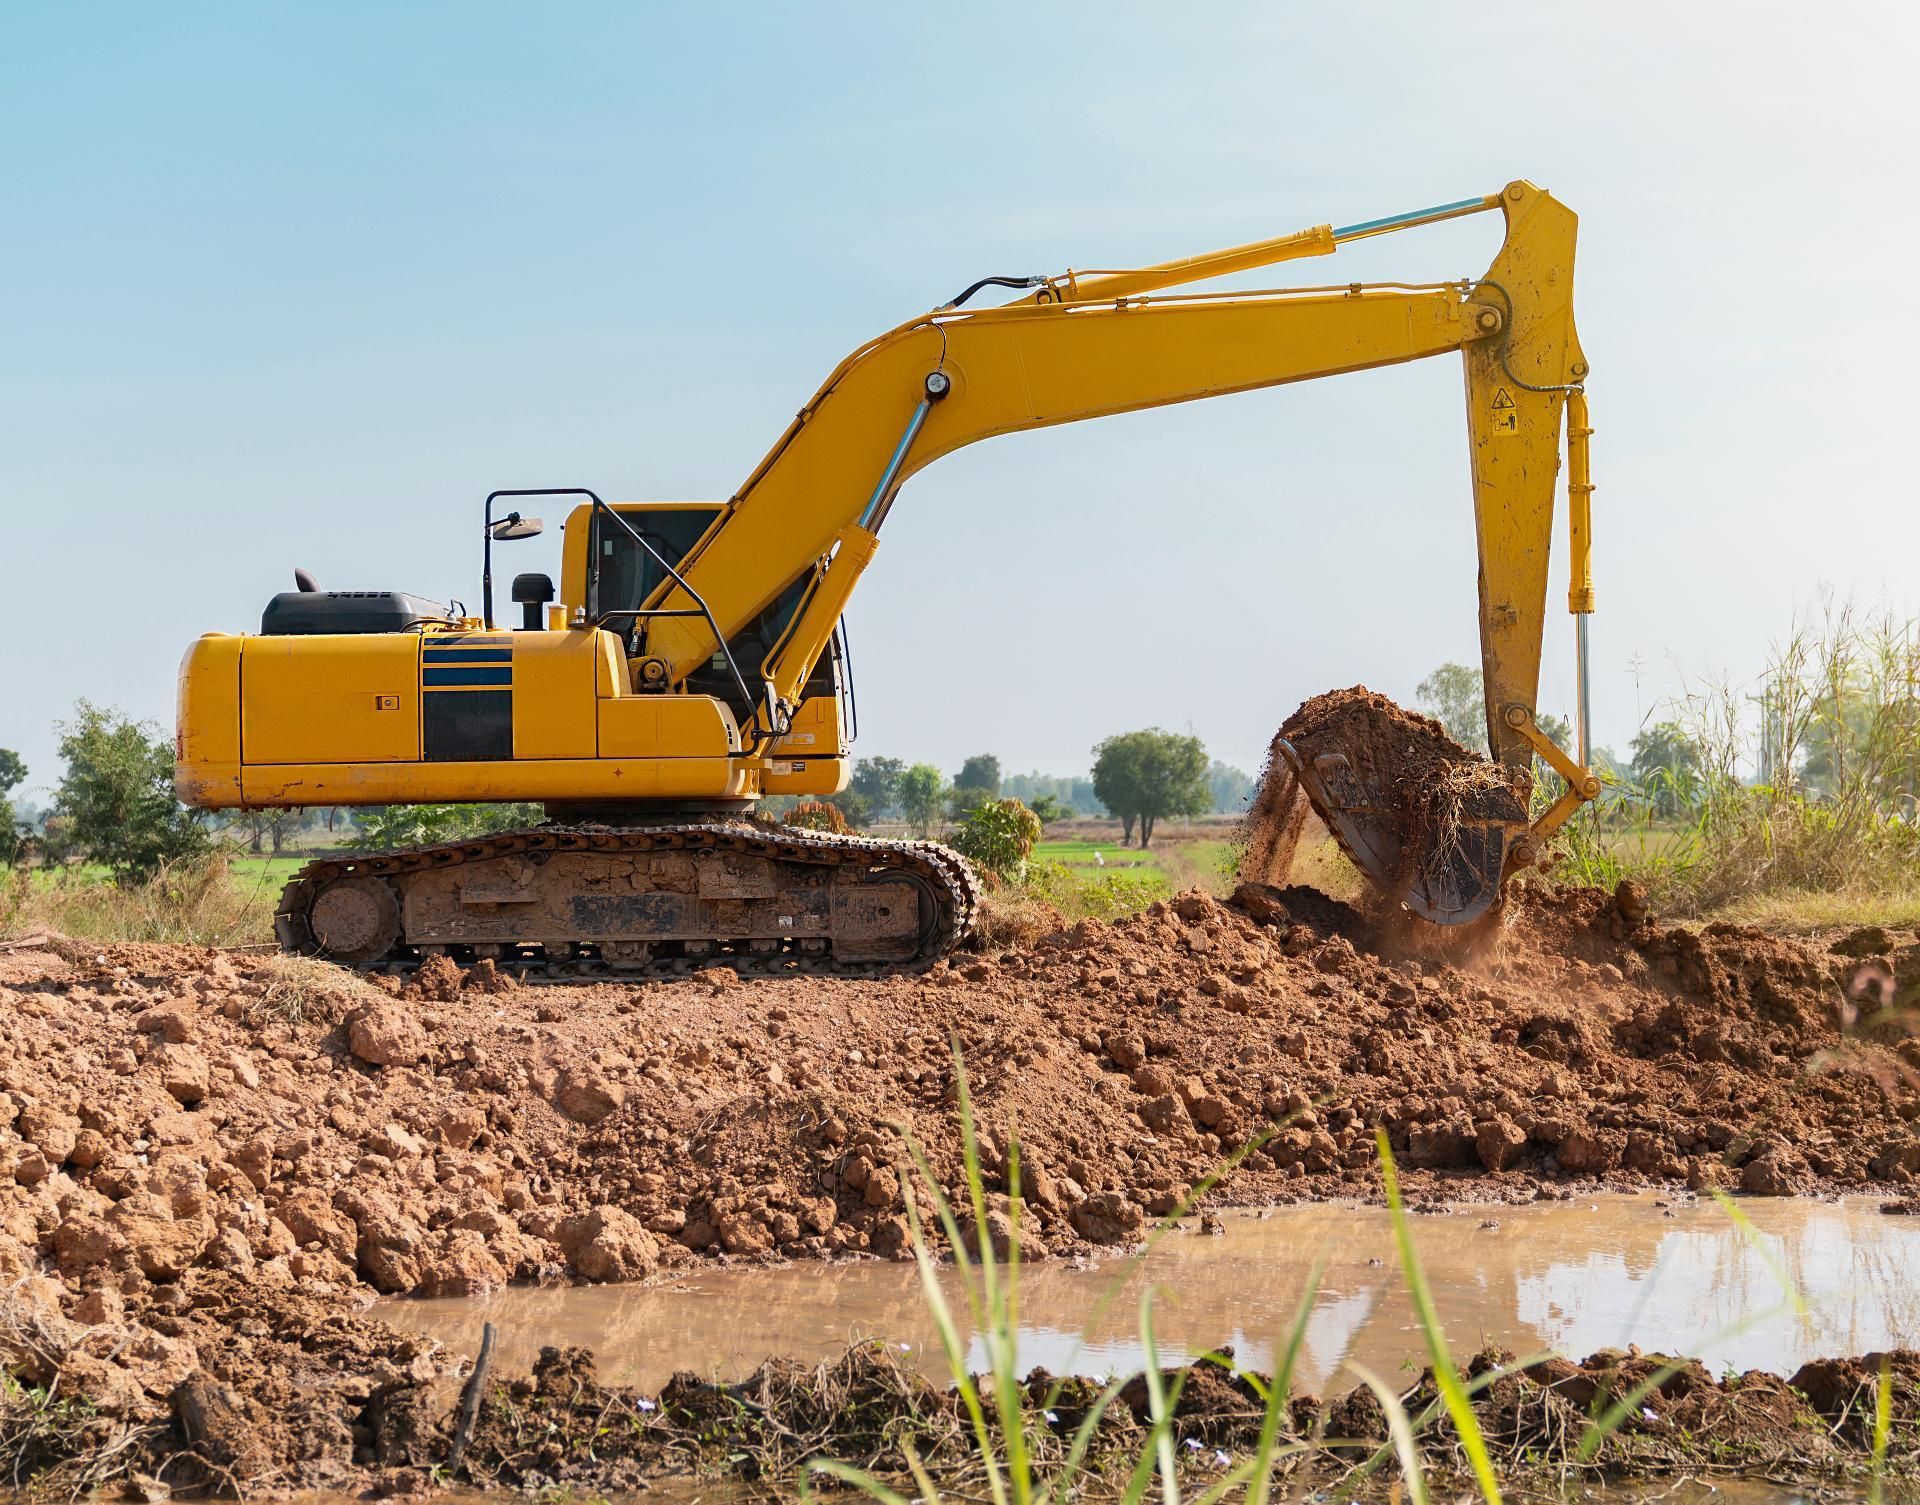 a yellow excavator is digging a hole in the dirt